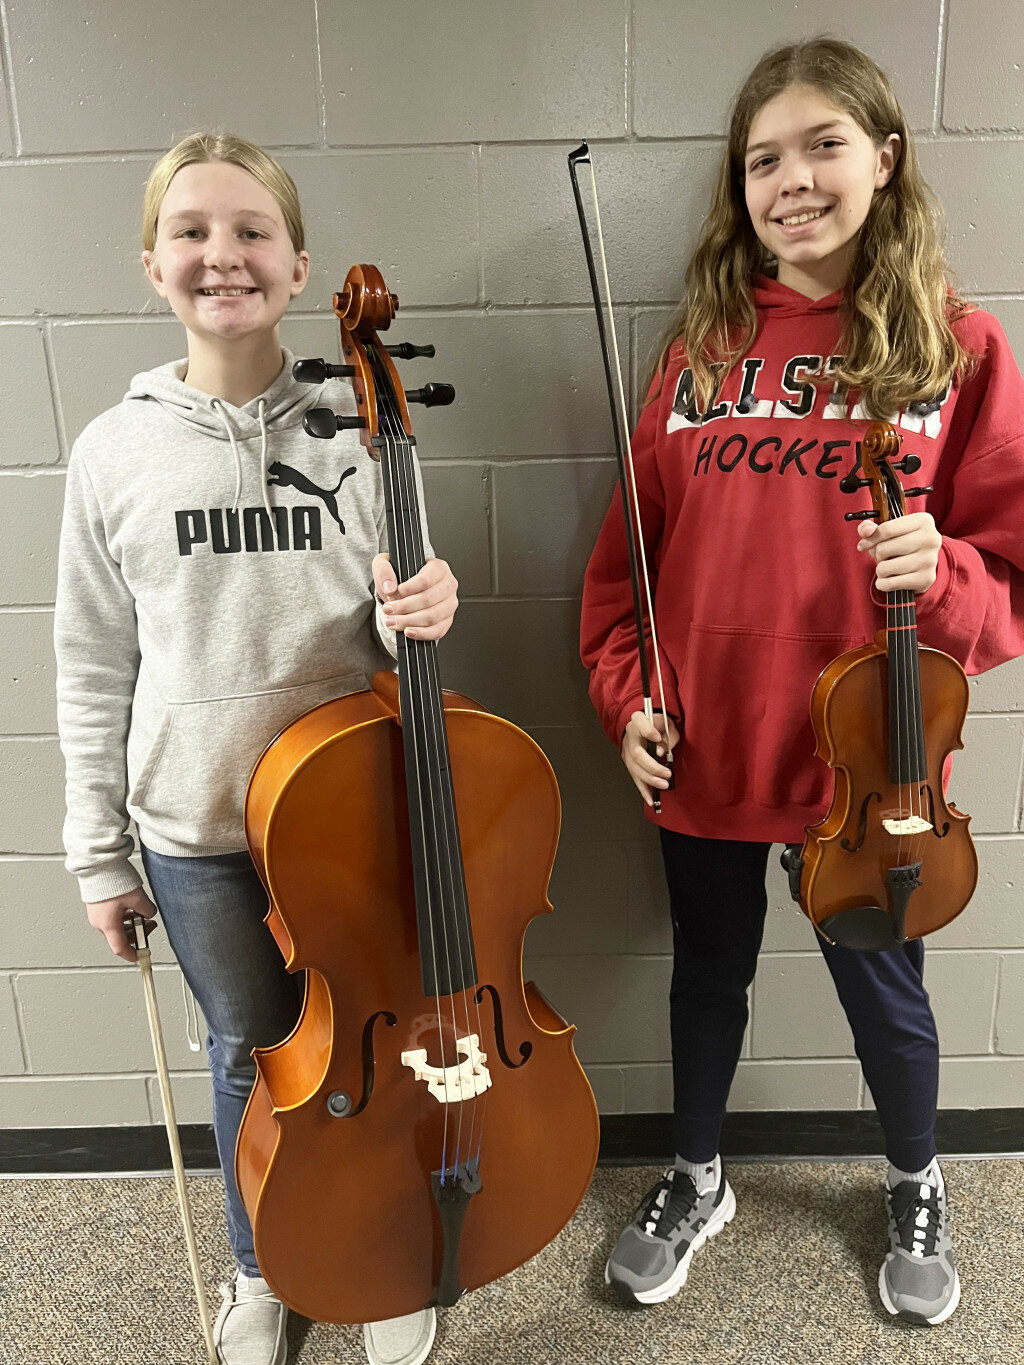 Courtesy Photo
Students at Huron Middle School named to All State Orchestra are Lydia Beck, left, and Avelia Colon-Rathjen.